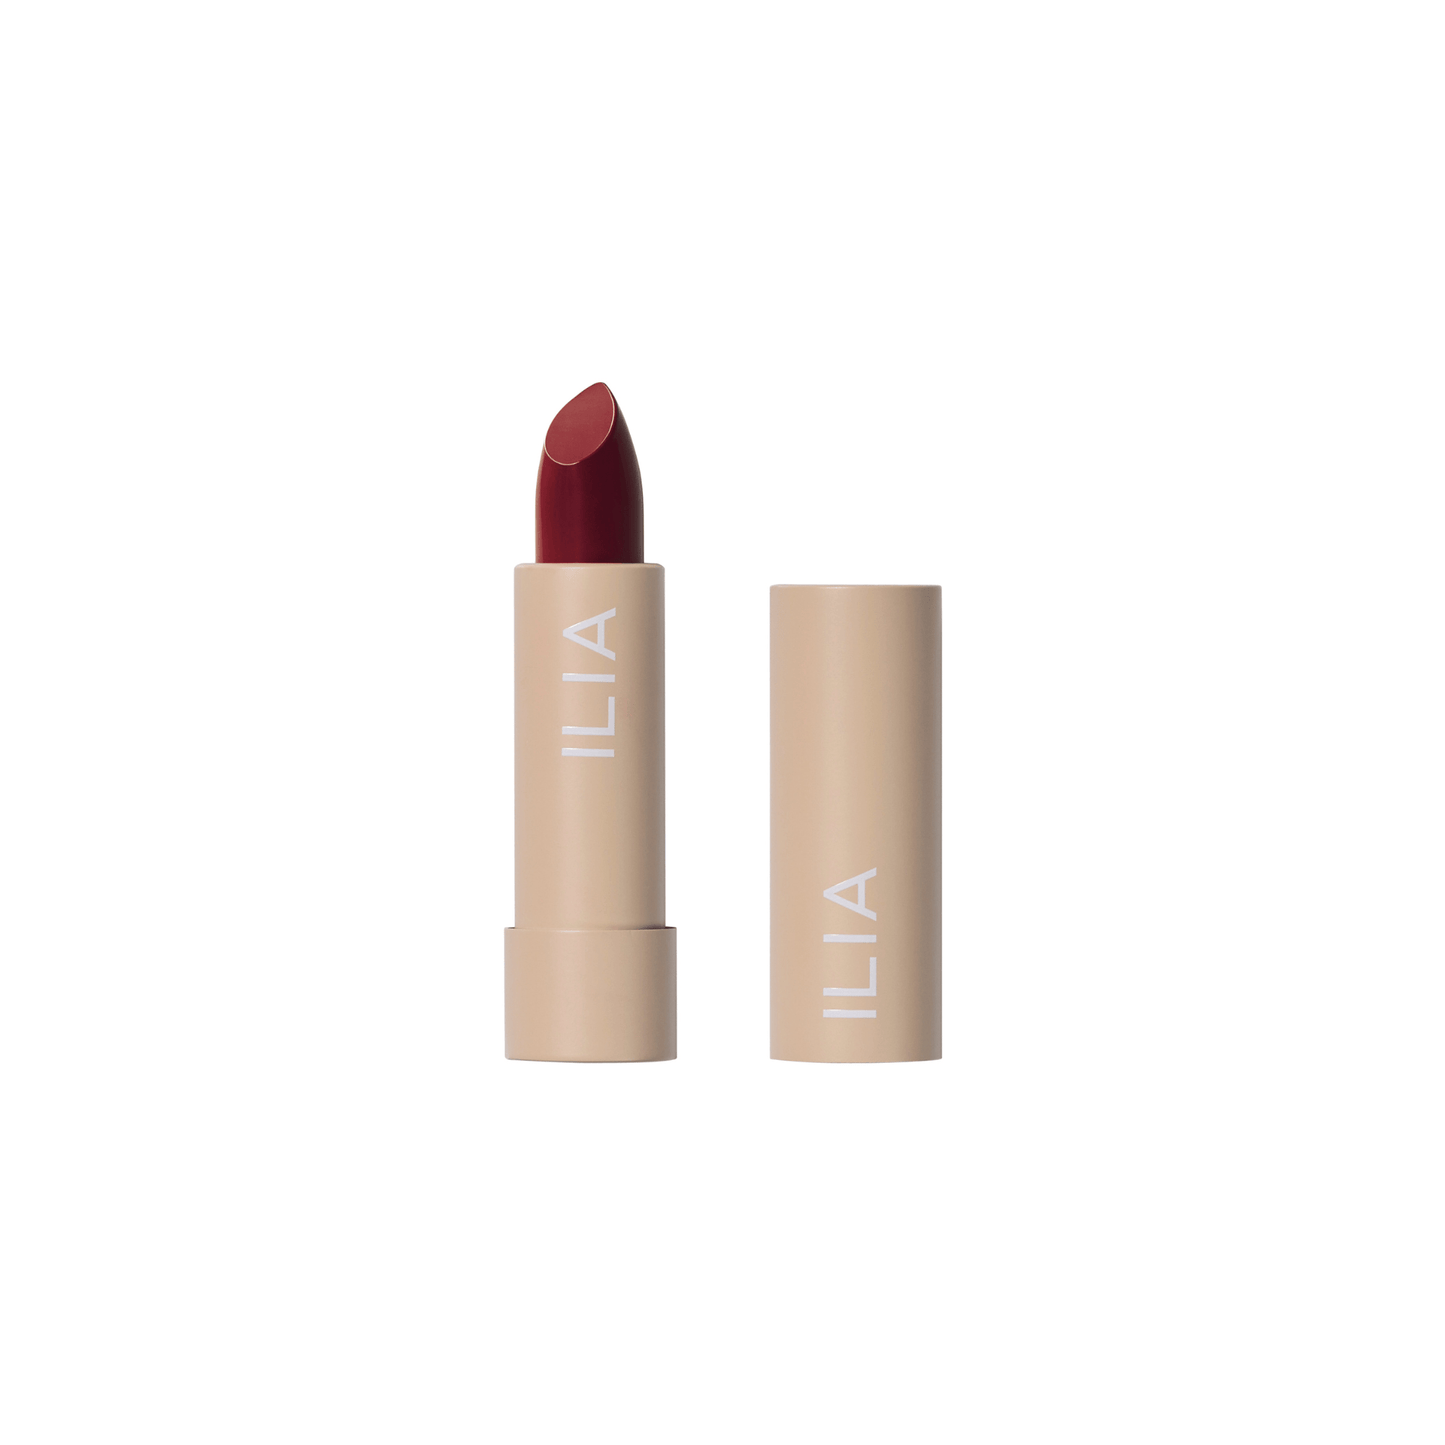 Primary Image of Color Block Lipstick in Rumba